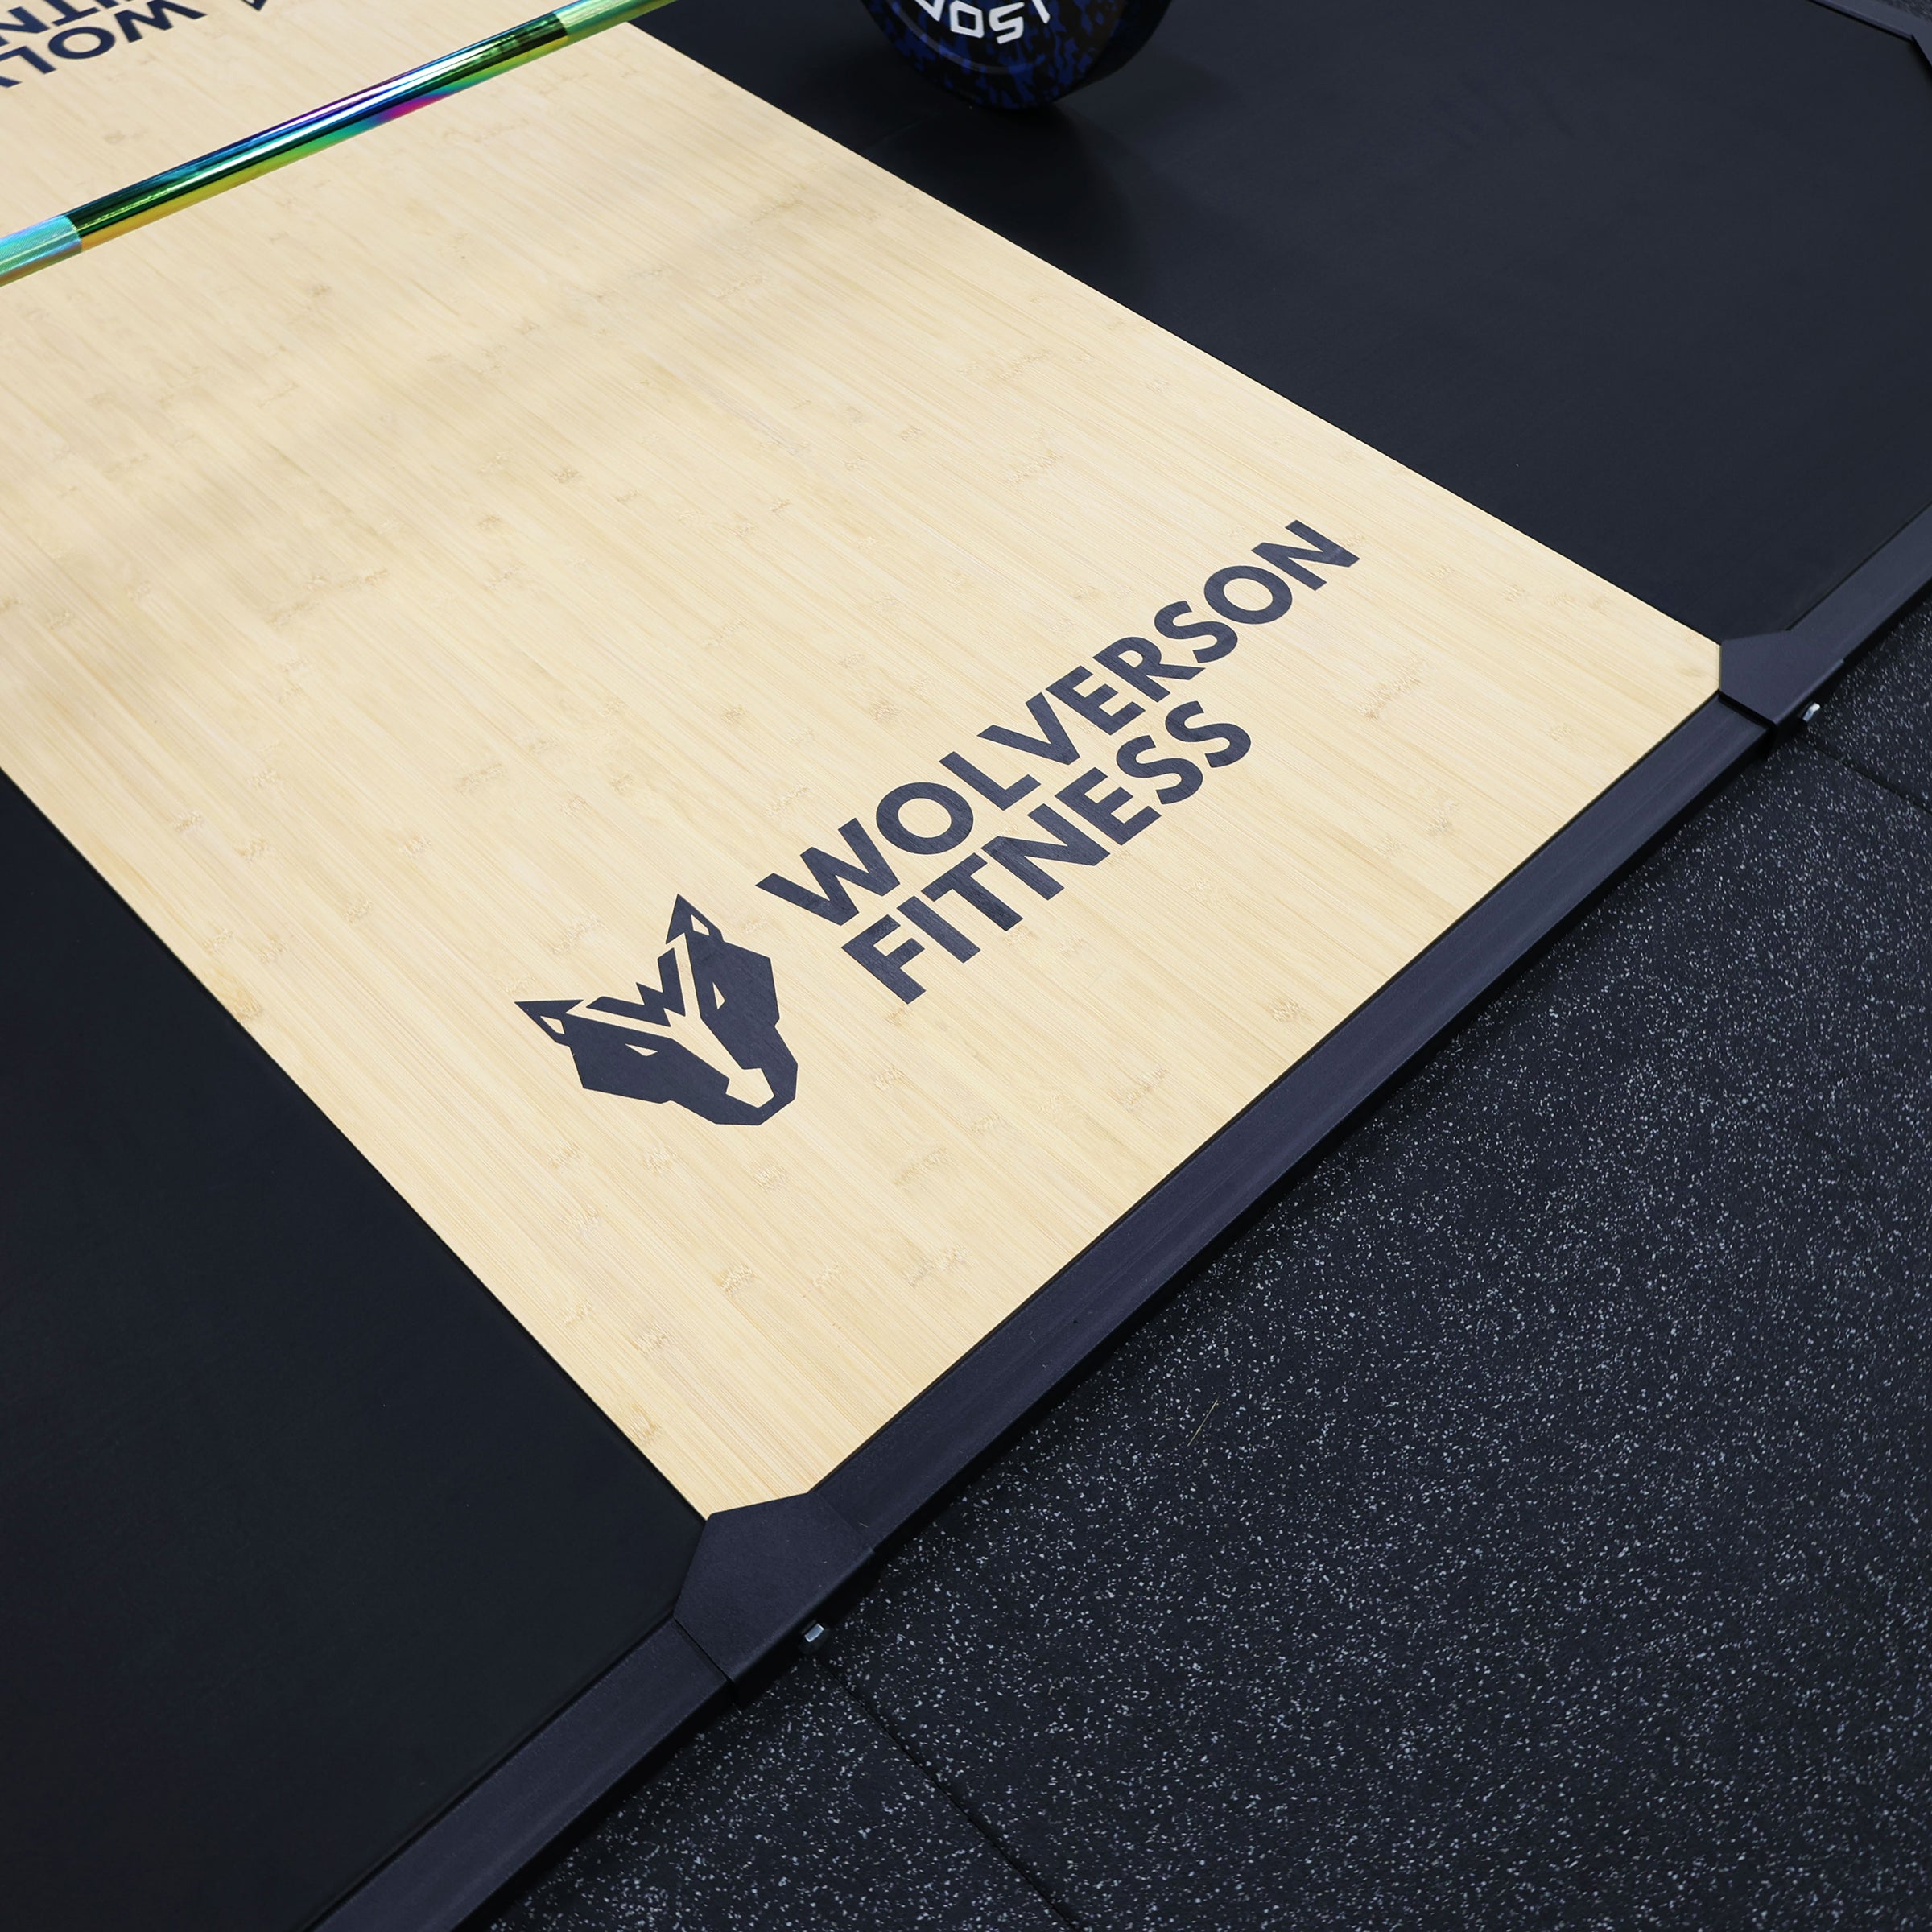 Wolverson Olympic Lifting Platform - Wolverson Fitness